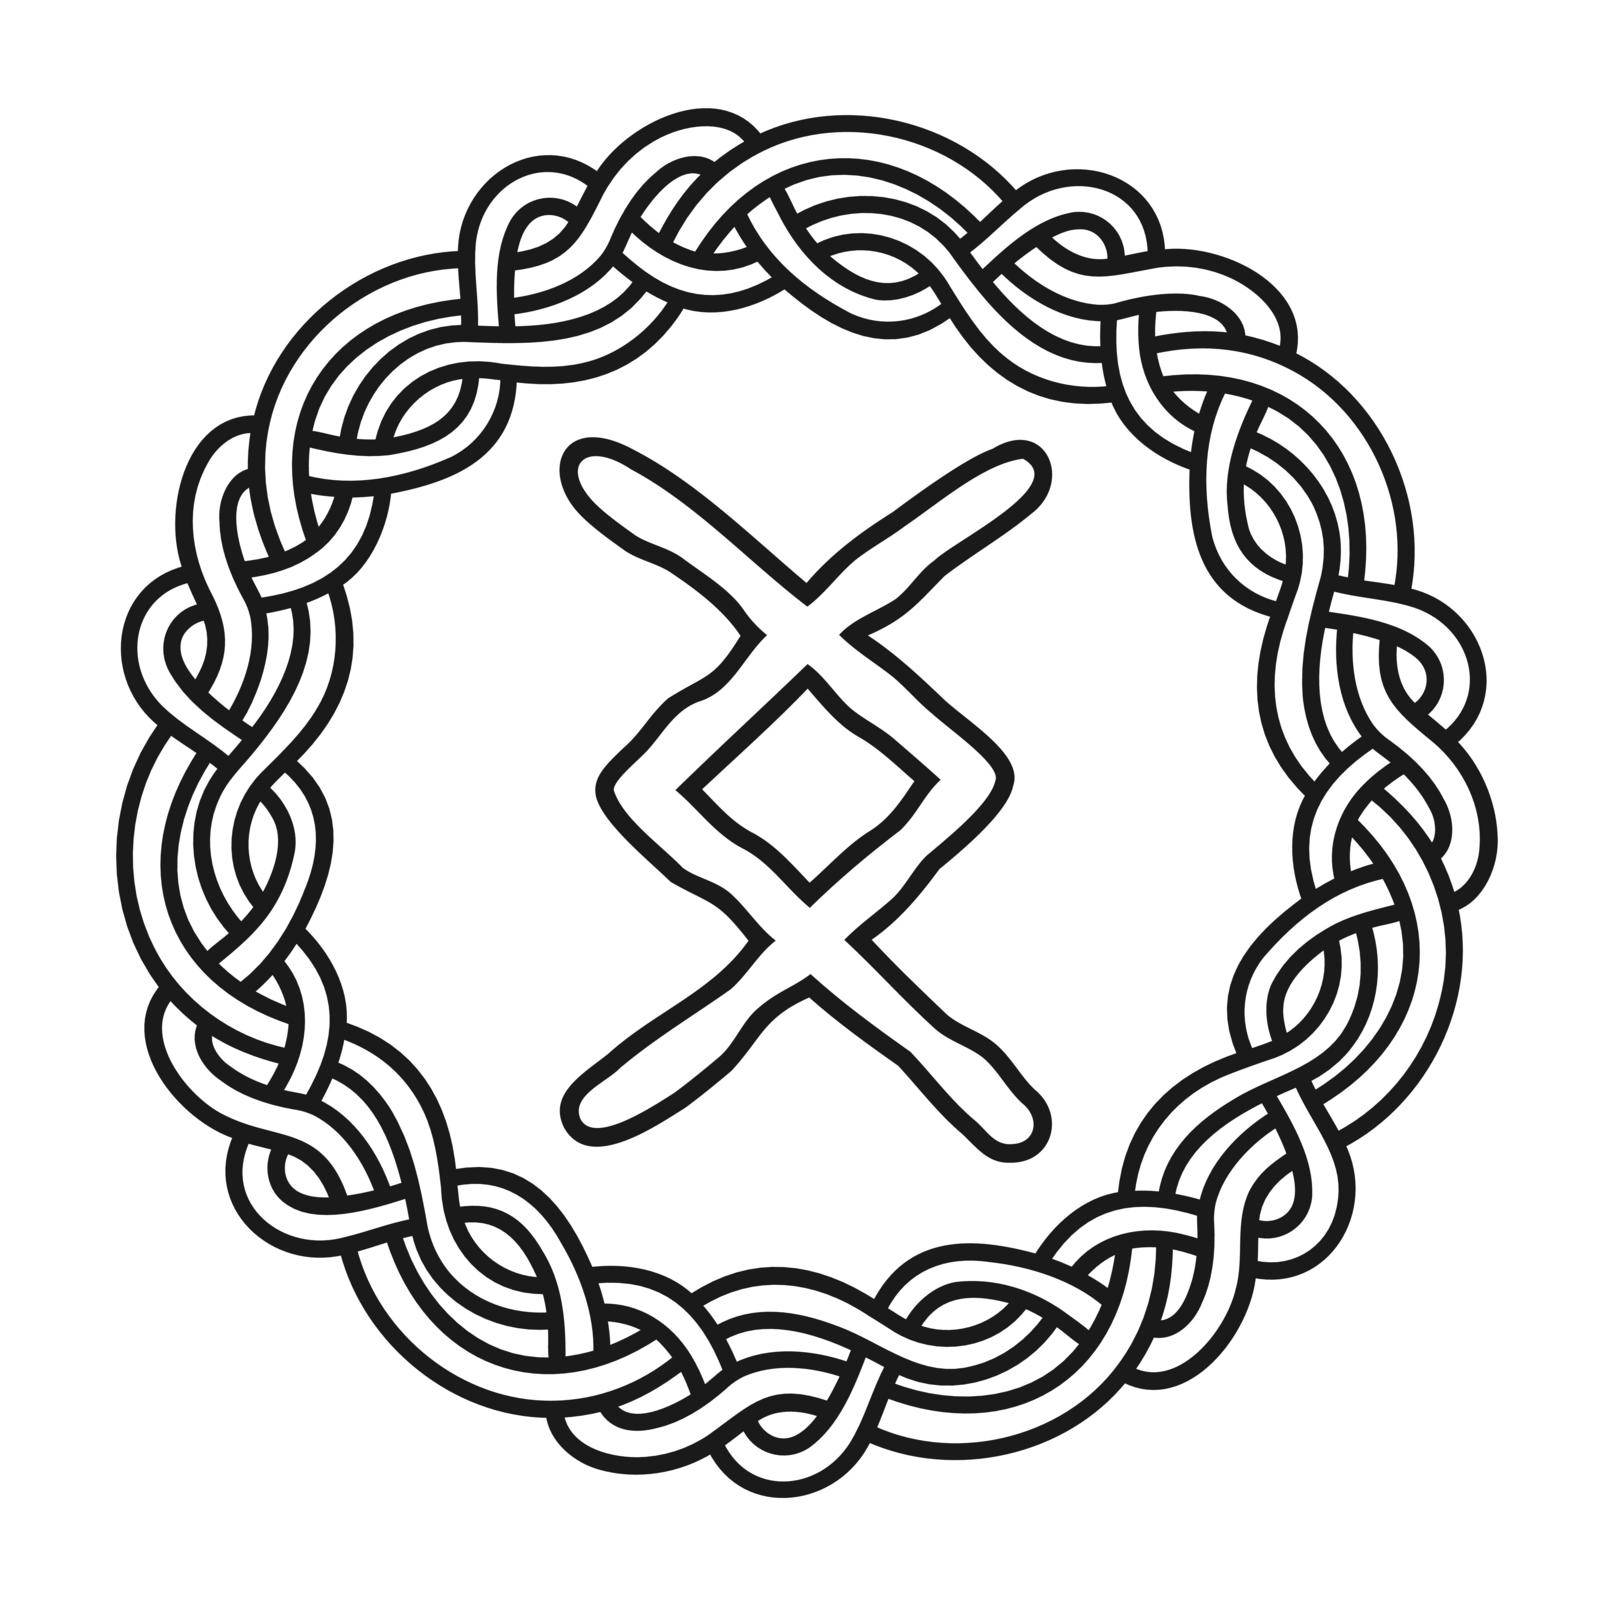 Rune Inguz Ingwaz in a circle - an ancient Scandinavian symbol or sign, amulet. Viking writing. Hand drawn outline vector illustration for websites, games, engraving and print. by Pyromaster